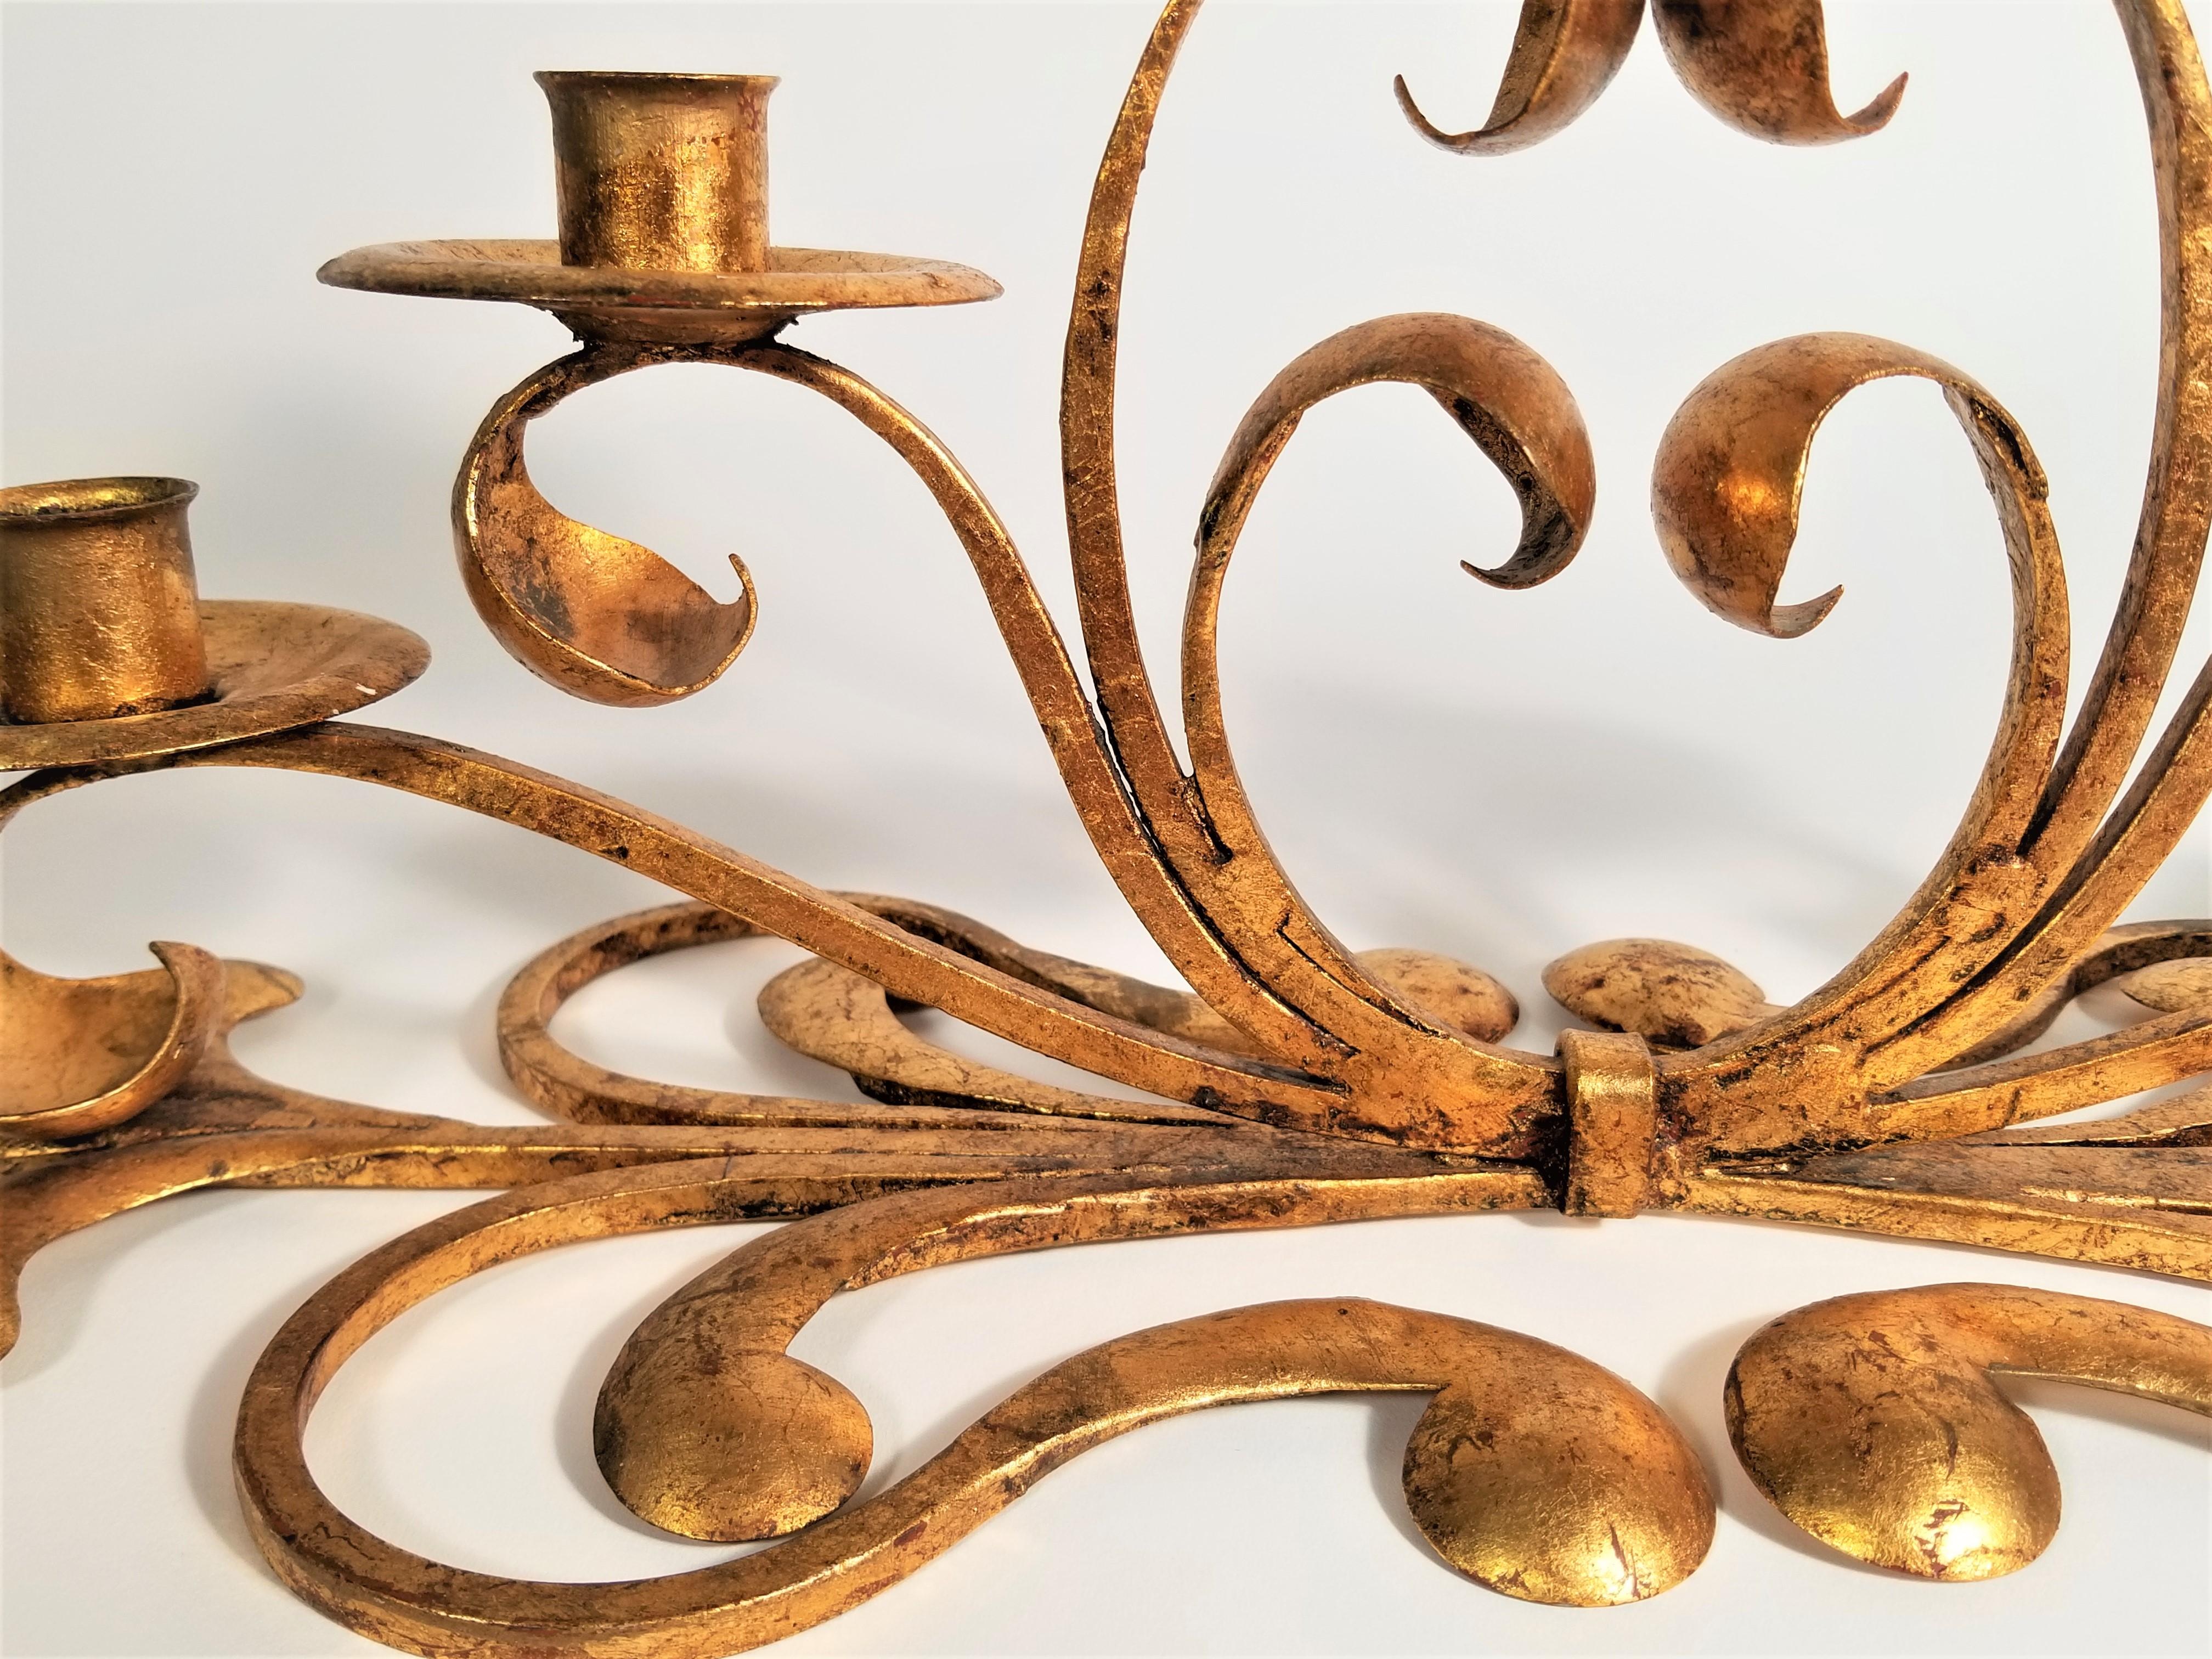 Italian Signed S. Salvadori  Gilded Candelabra, 1950s  Made in Italy For Sale 5